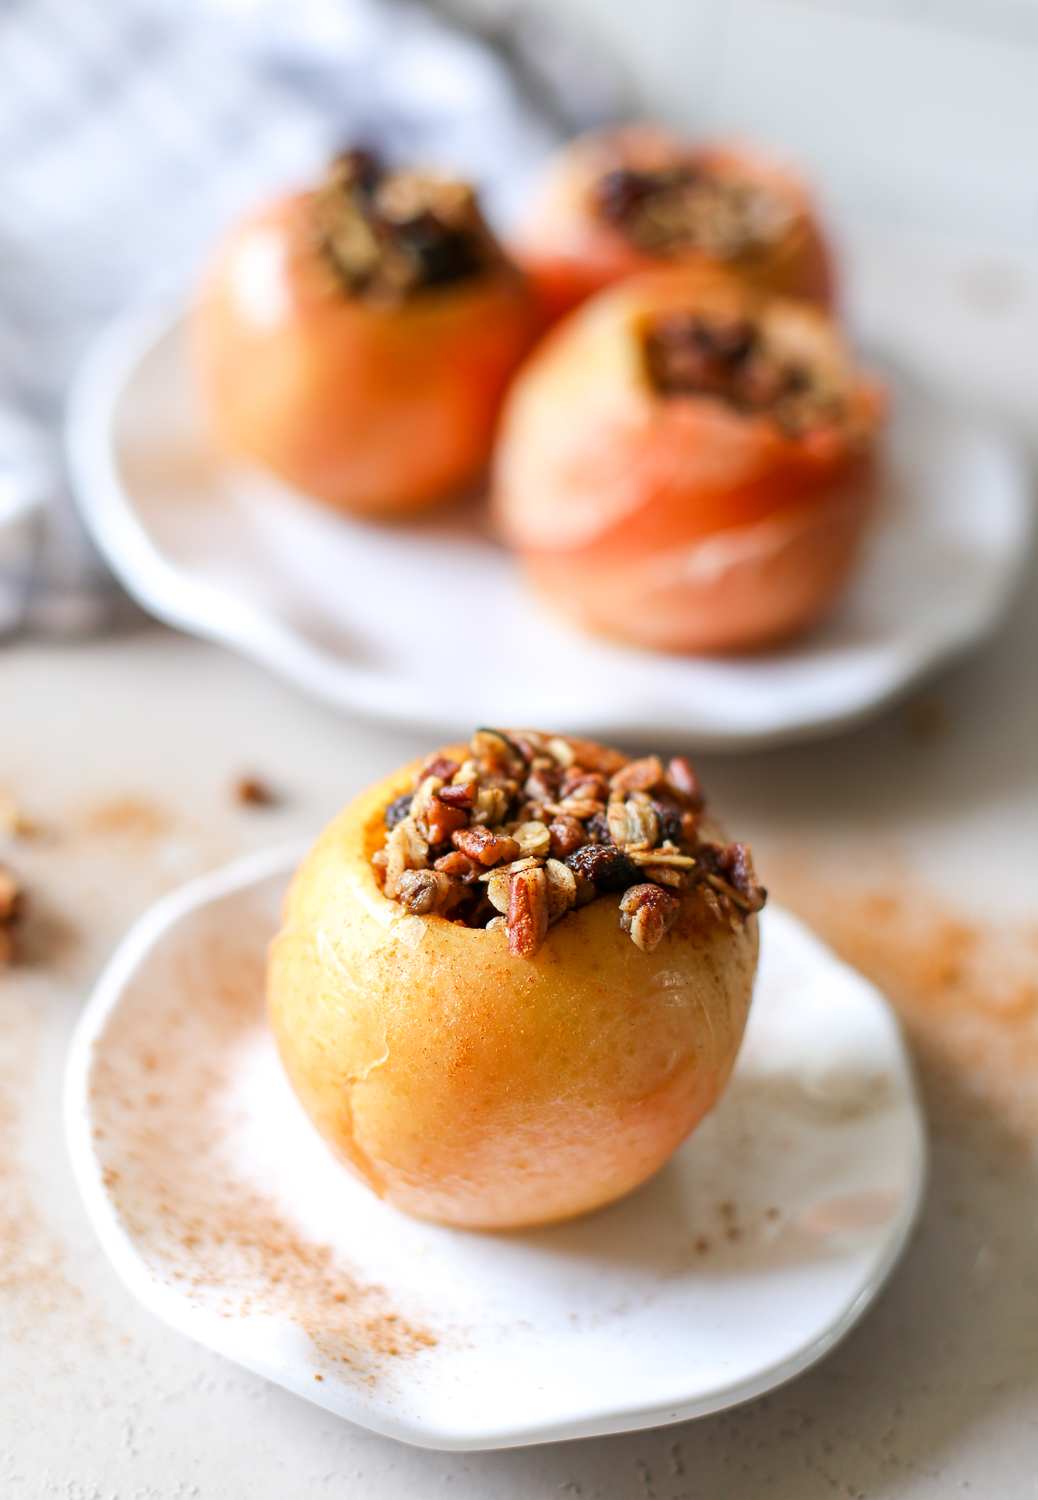 A baked apple on a plate filled with oats, pecans, cinnamon, and more.